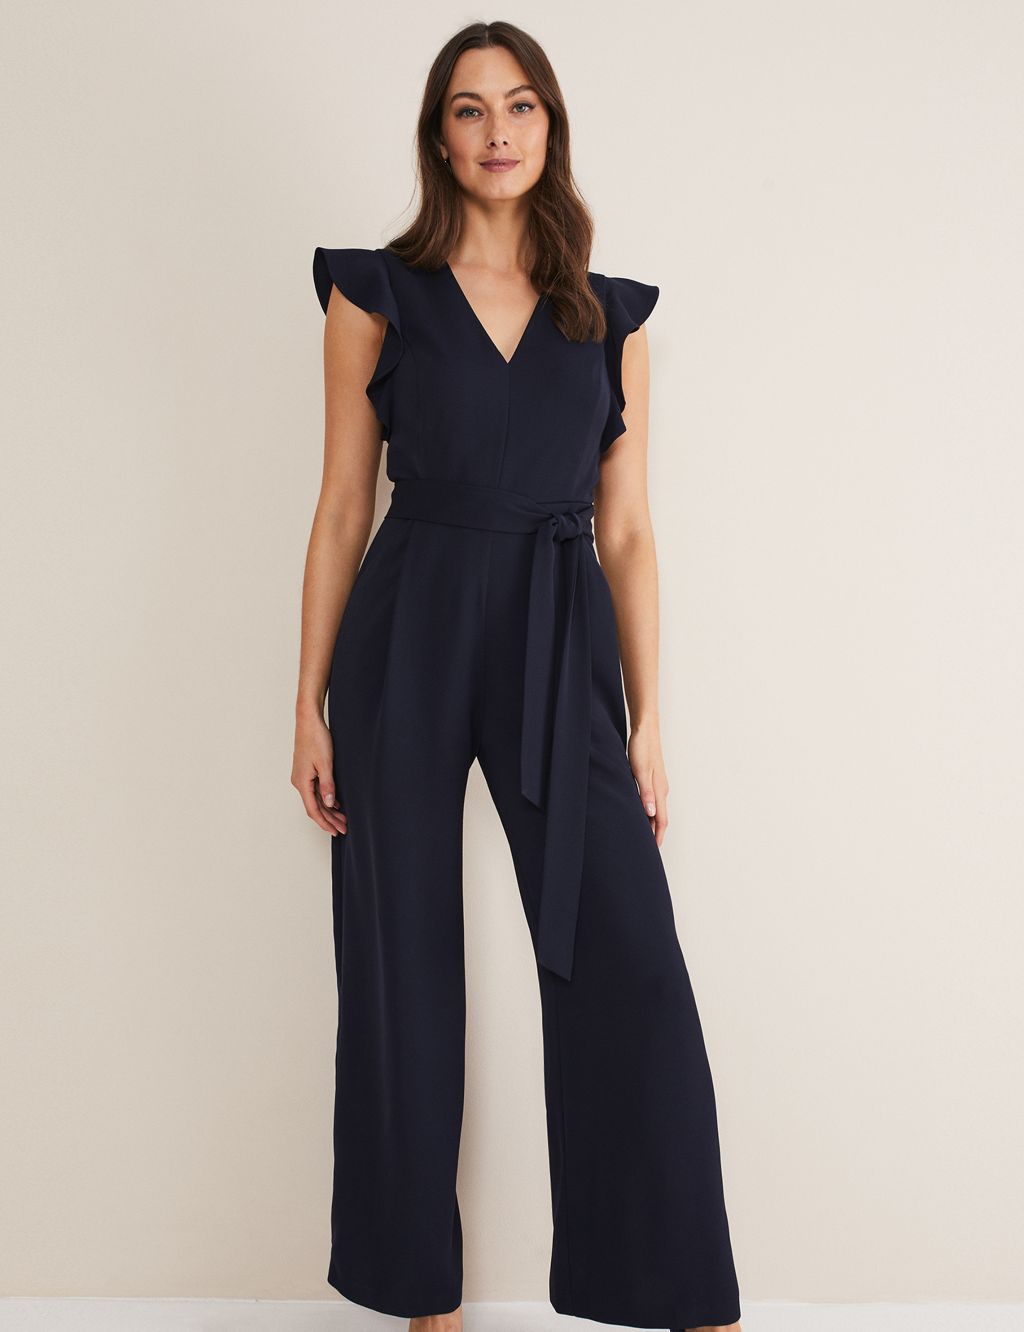 Frill Detail Short Sleeve Jumpsuit | Phase Eight | M&S